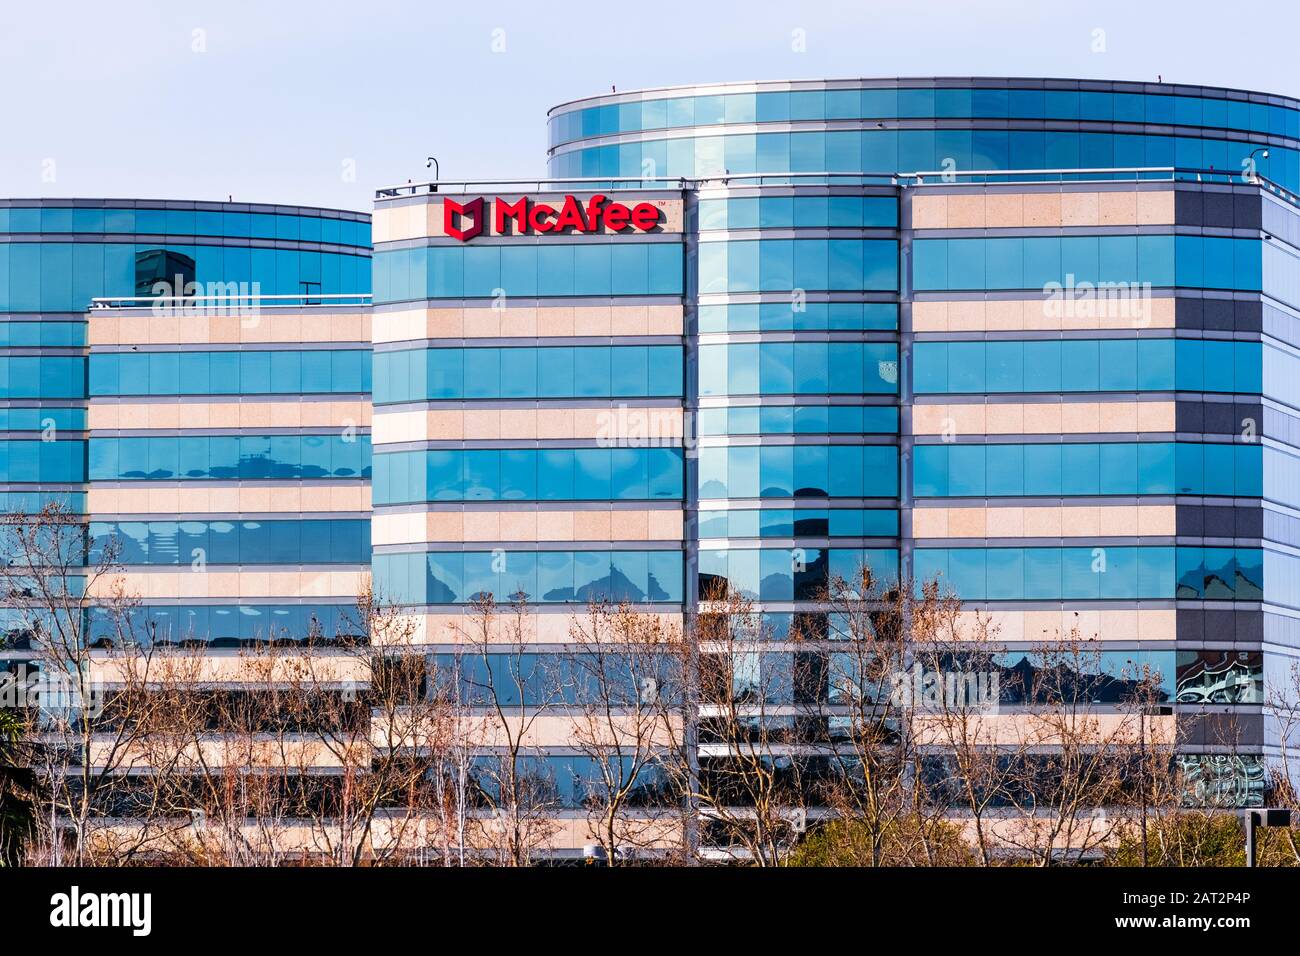 Jan 29, 2020 Santa Clara / CA / USA - McAfee Headquarters in Silicon Valley; McAfee, LLC is an American global computer security software company, joi Stock Photo